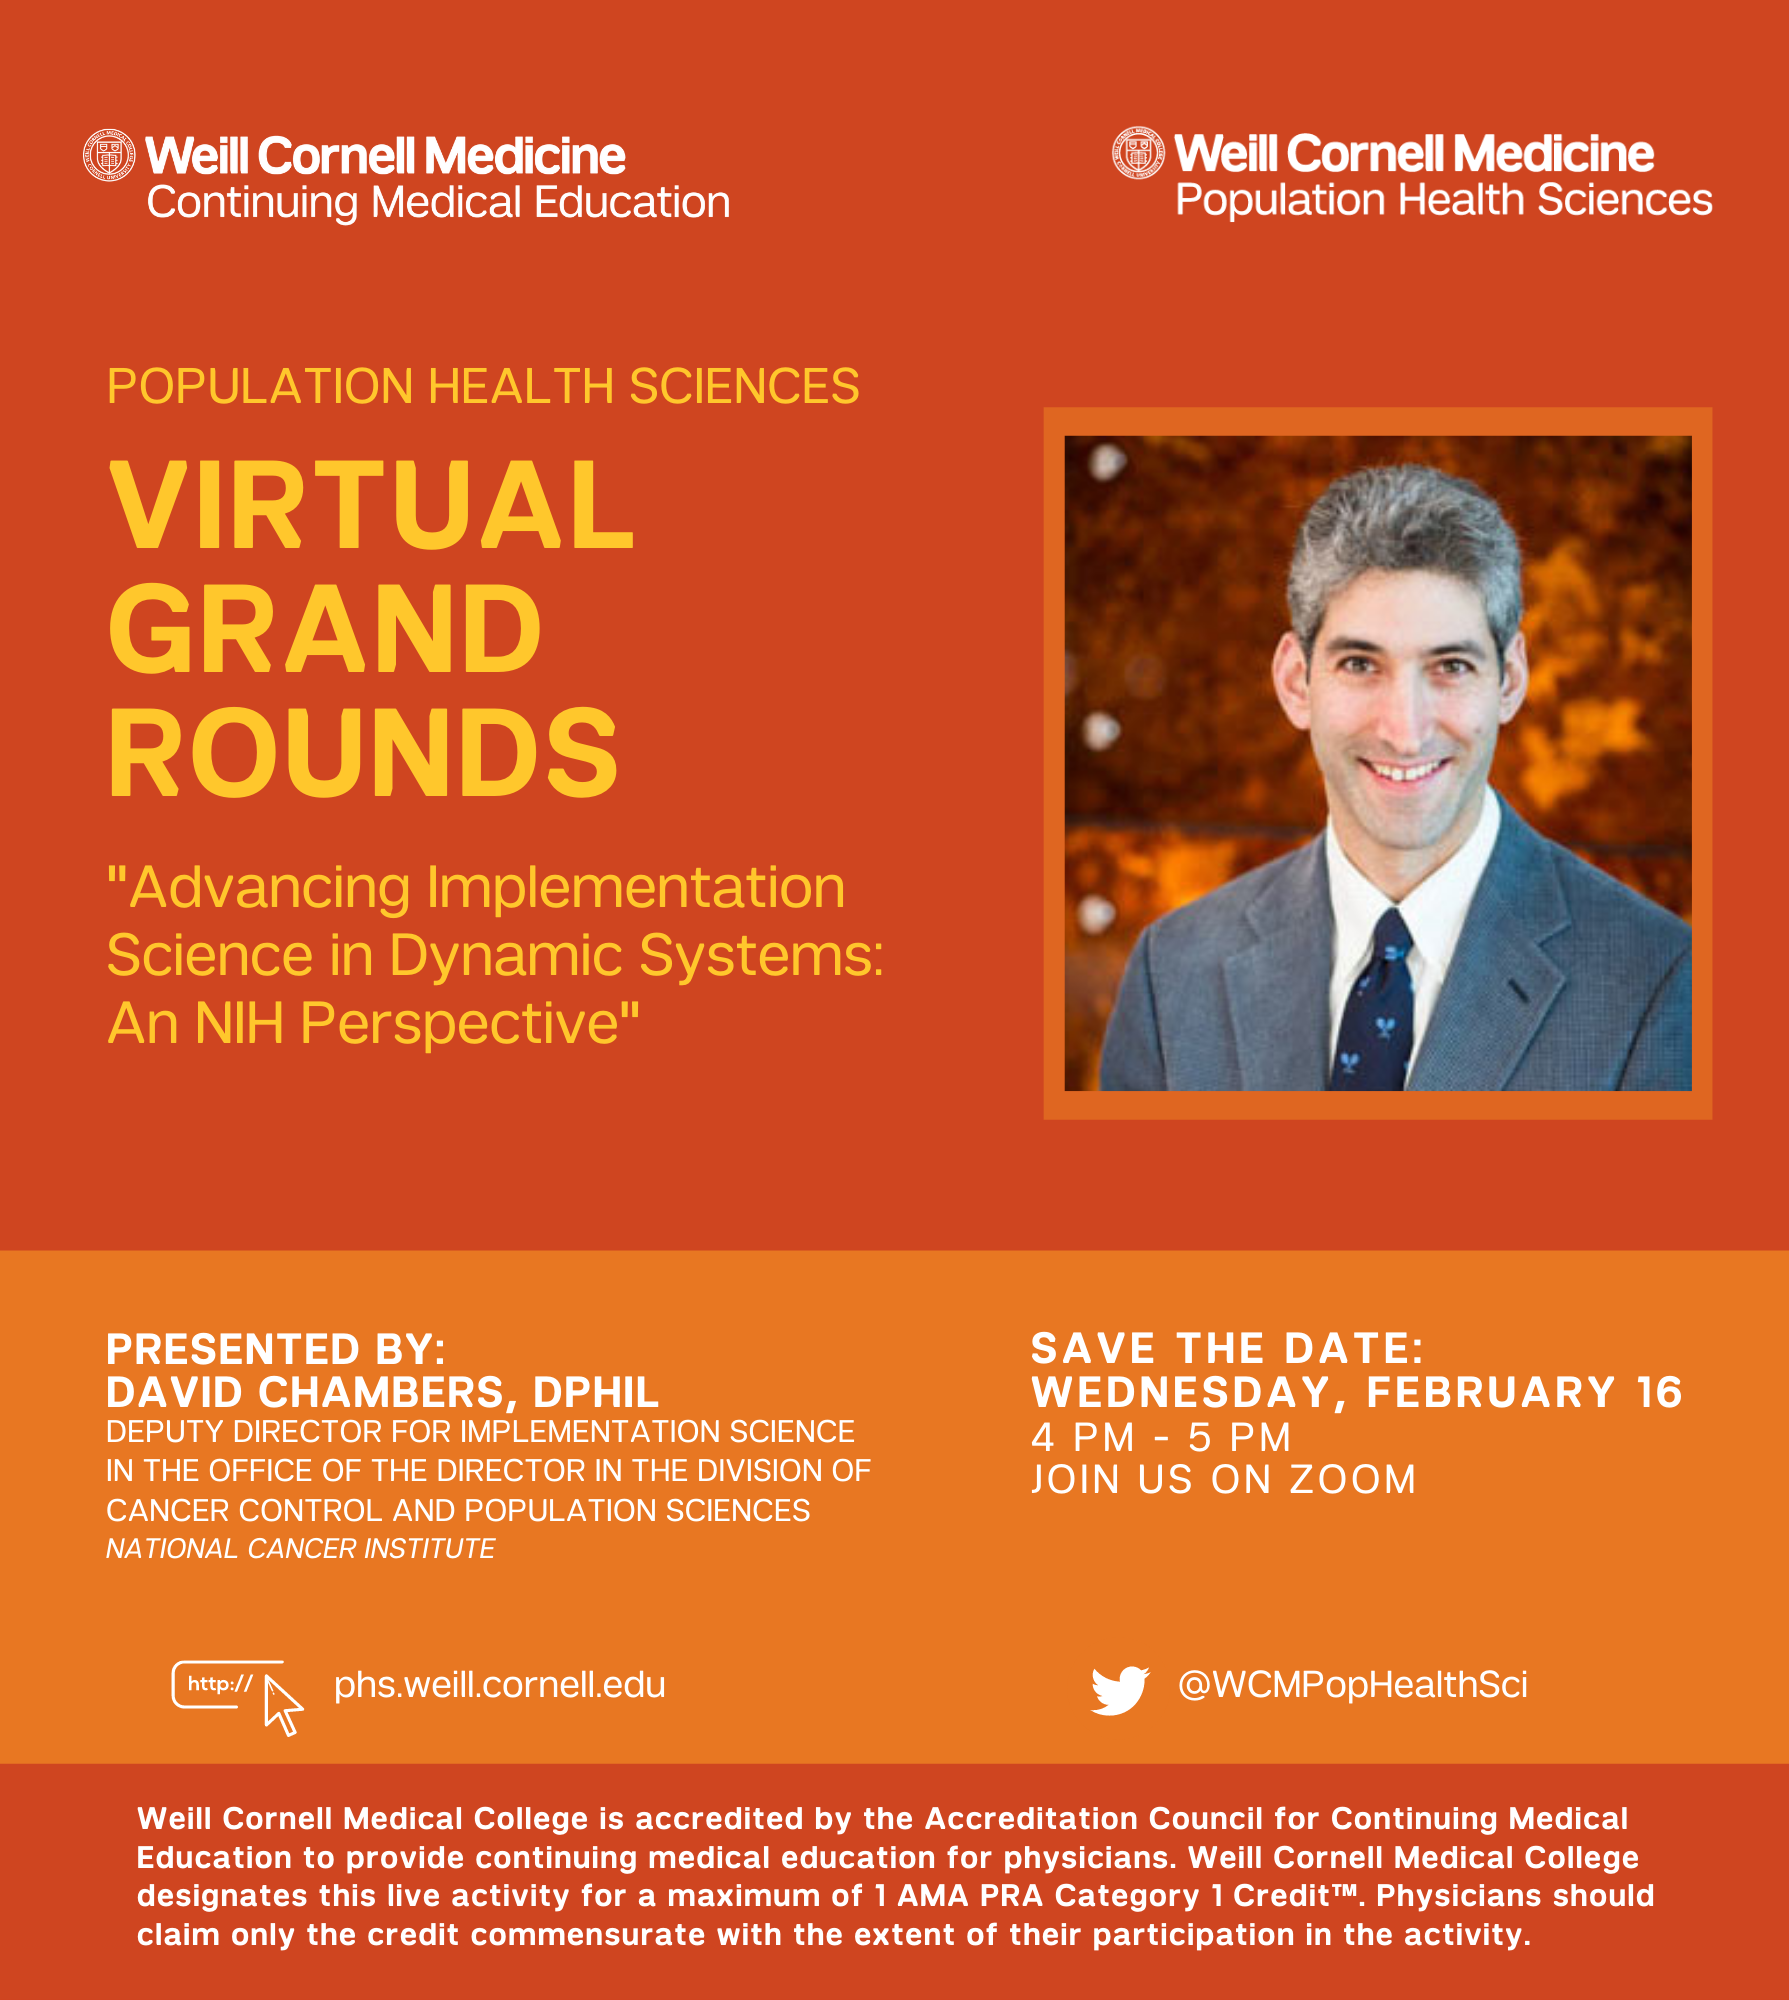 David Chambers Grand Rounds Flyer